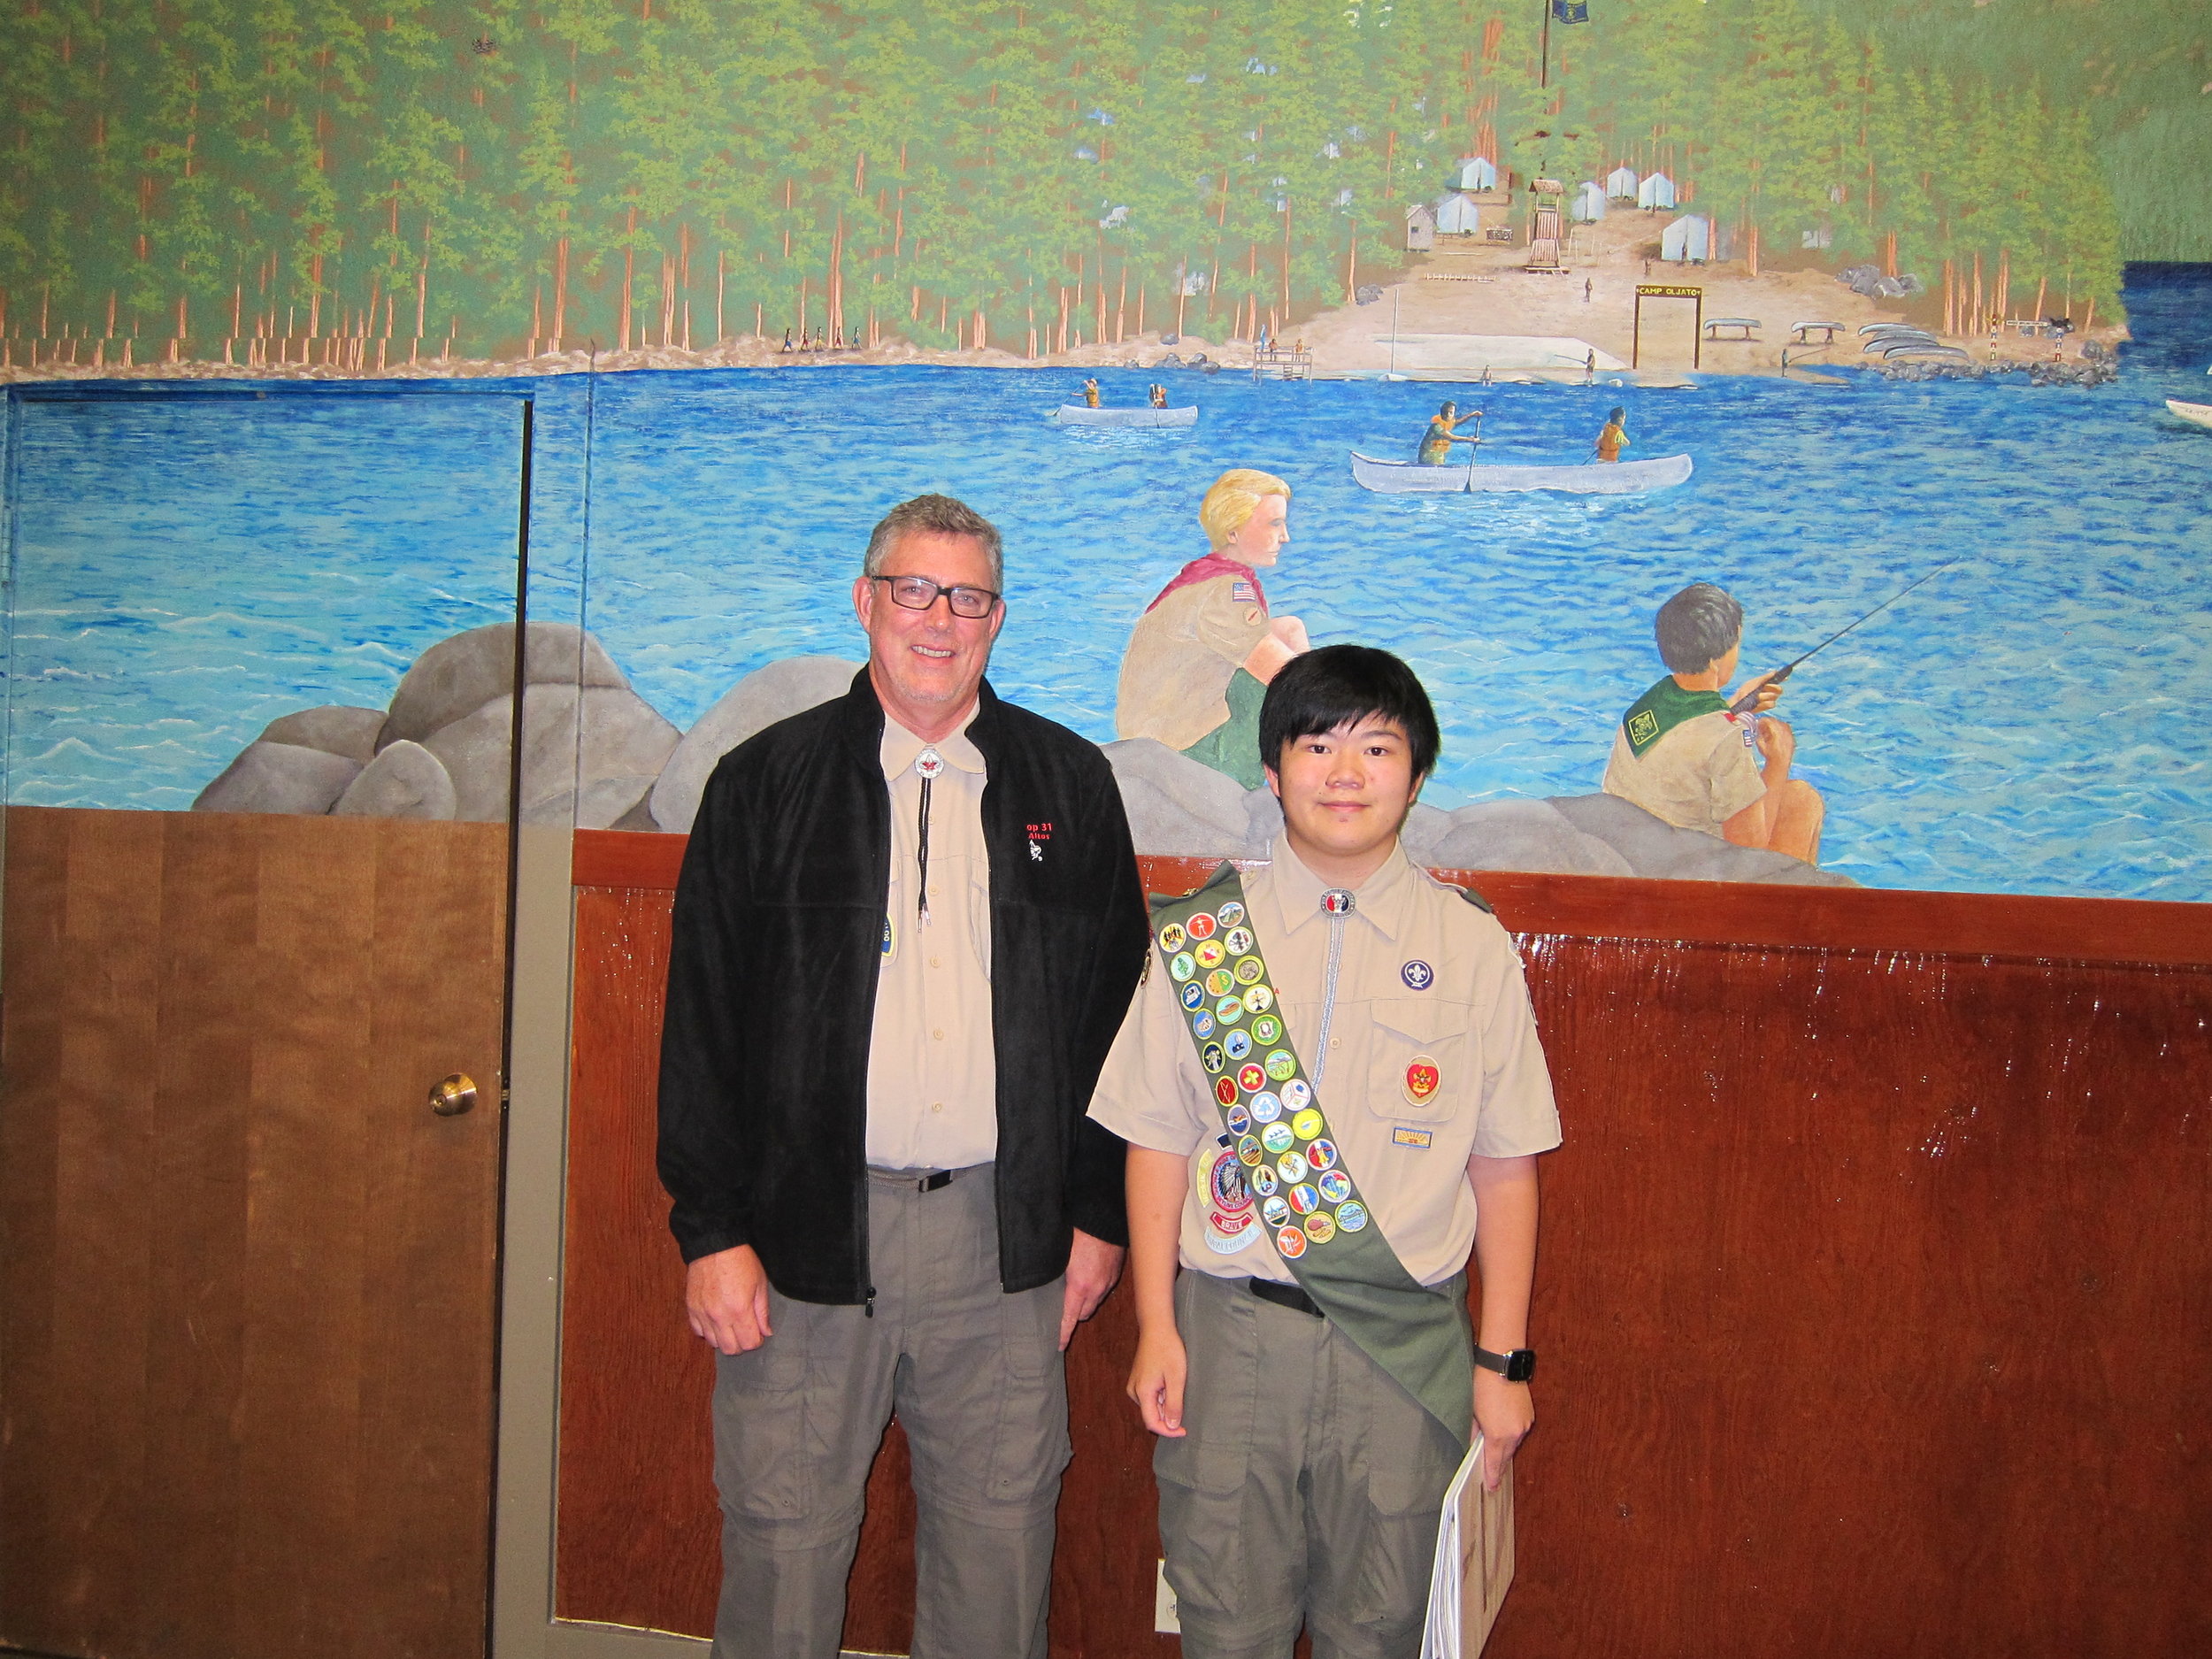 Jeff Marlett, Troop 31 Scoutmaster (left) and Eagle Scout Terence Lee (right) attending Eagle Board on August 25, 2016